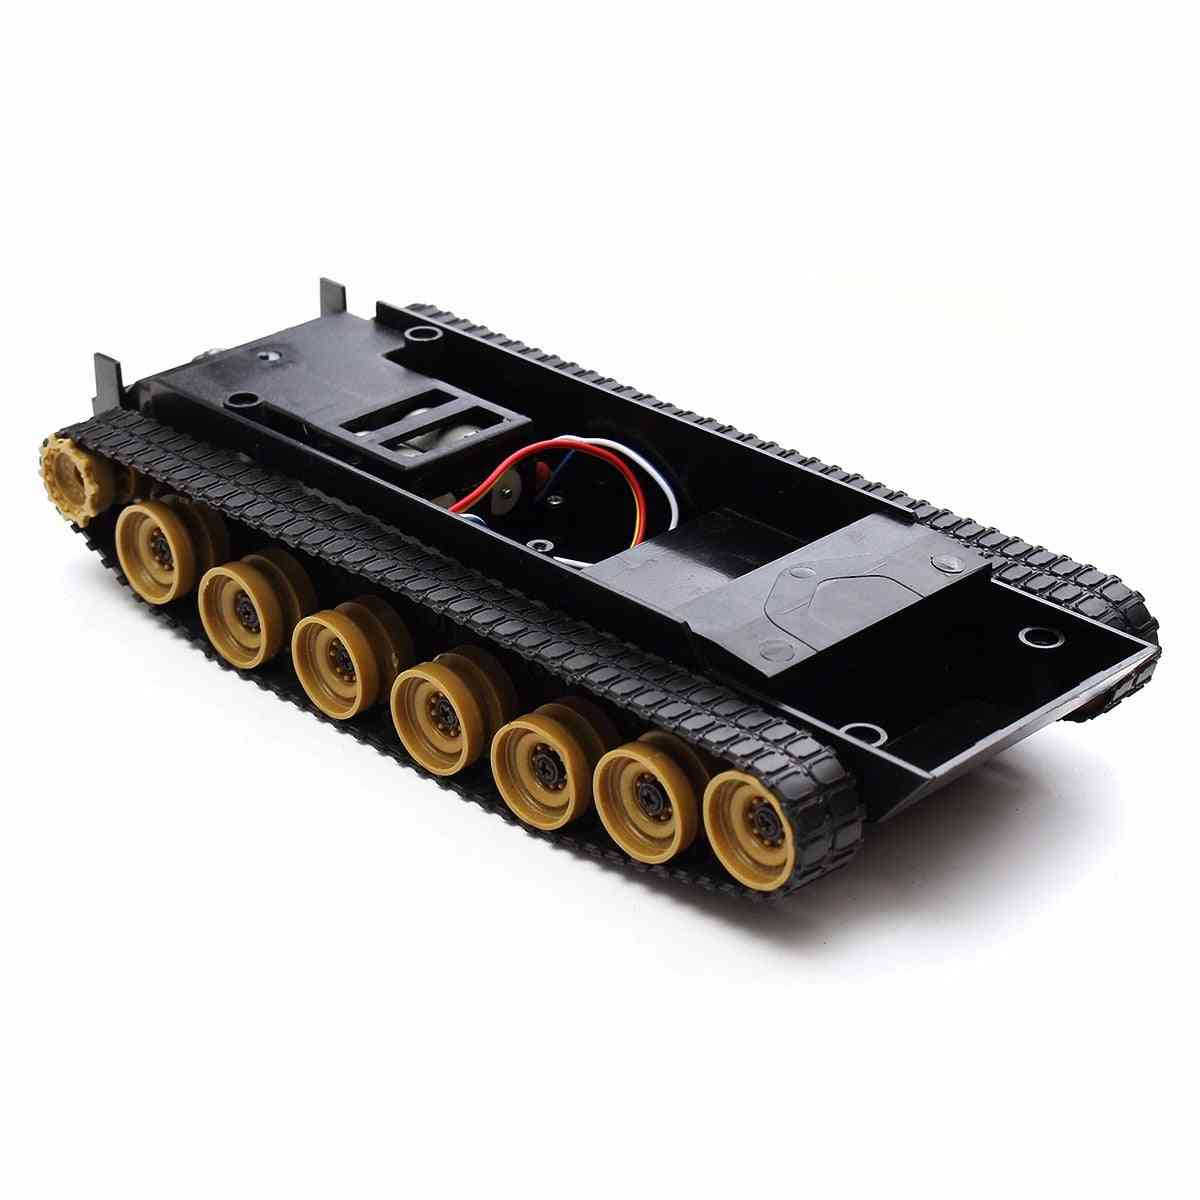 Tank Smart Robot Car Chassis, Rubber Track Crawler Kit